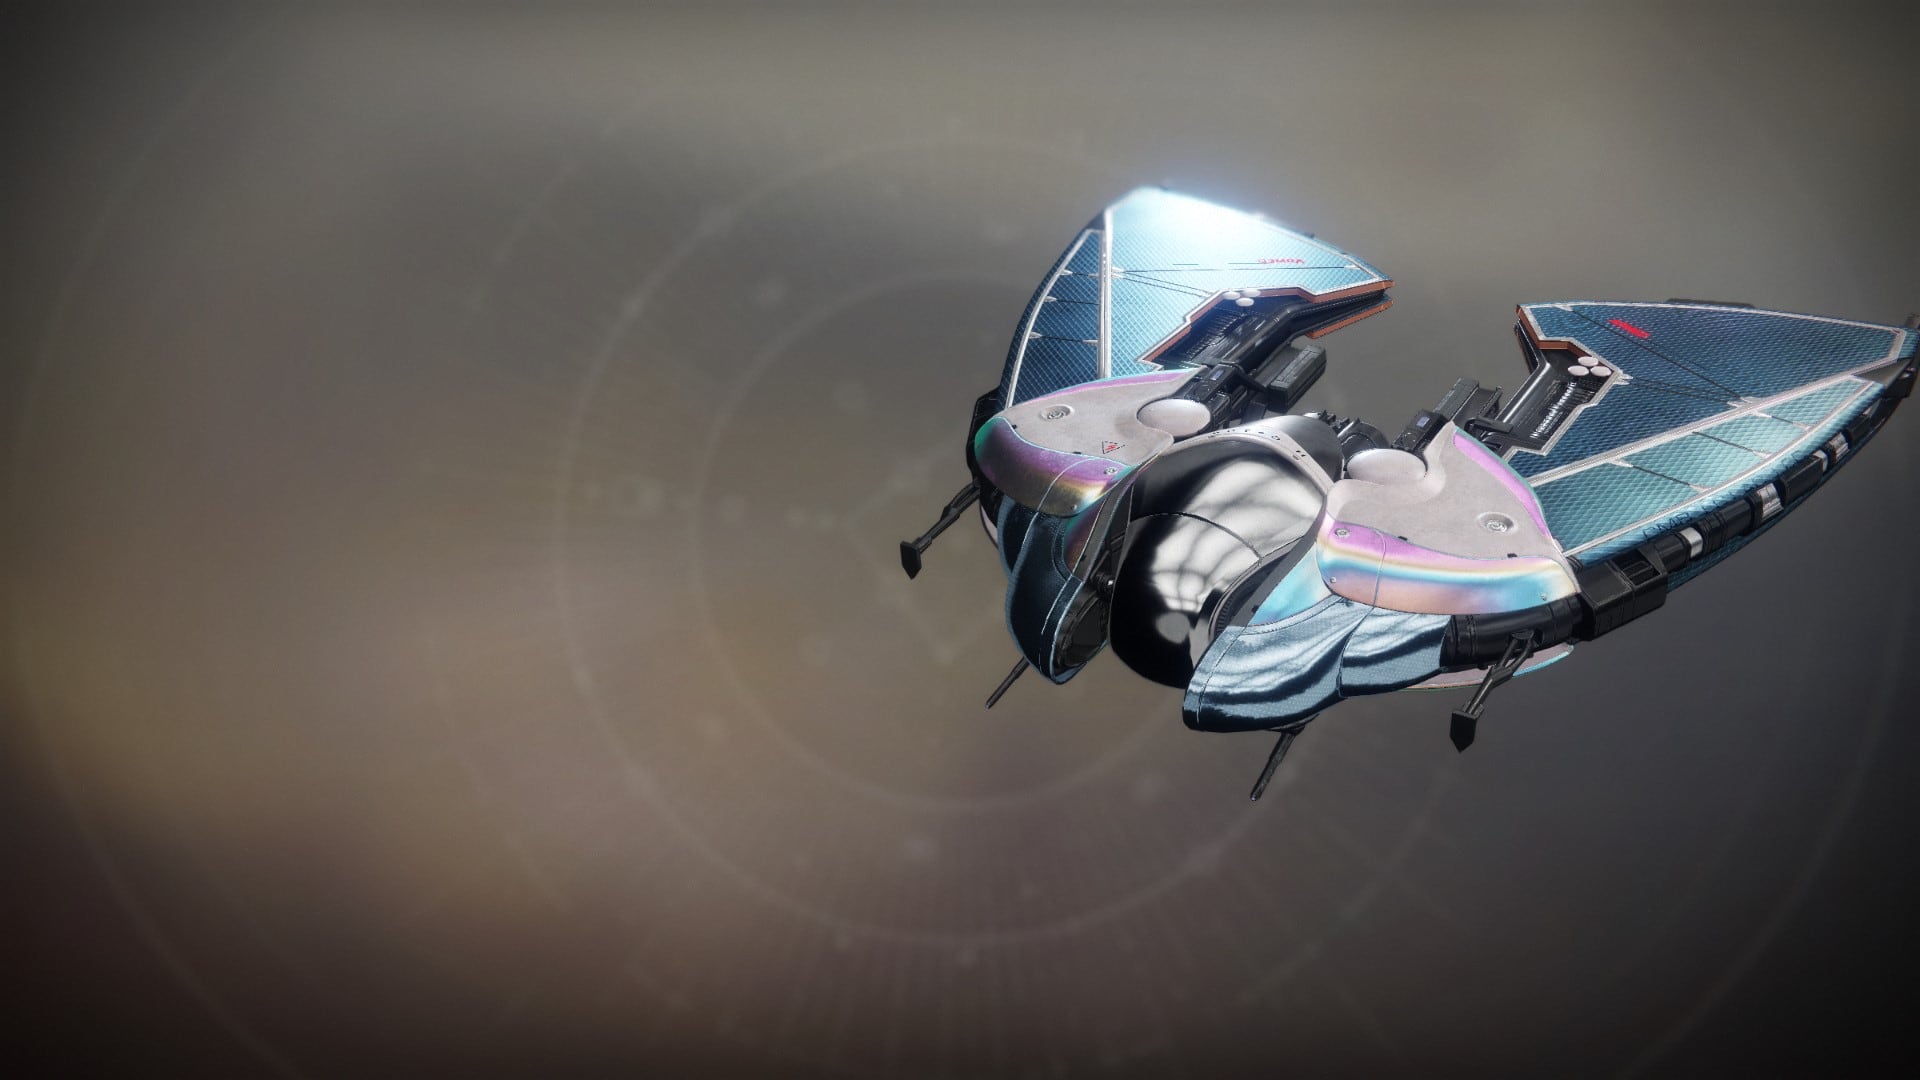 An in-game render of the Summertide Kite.